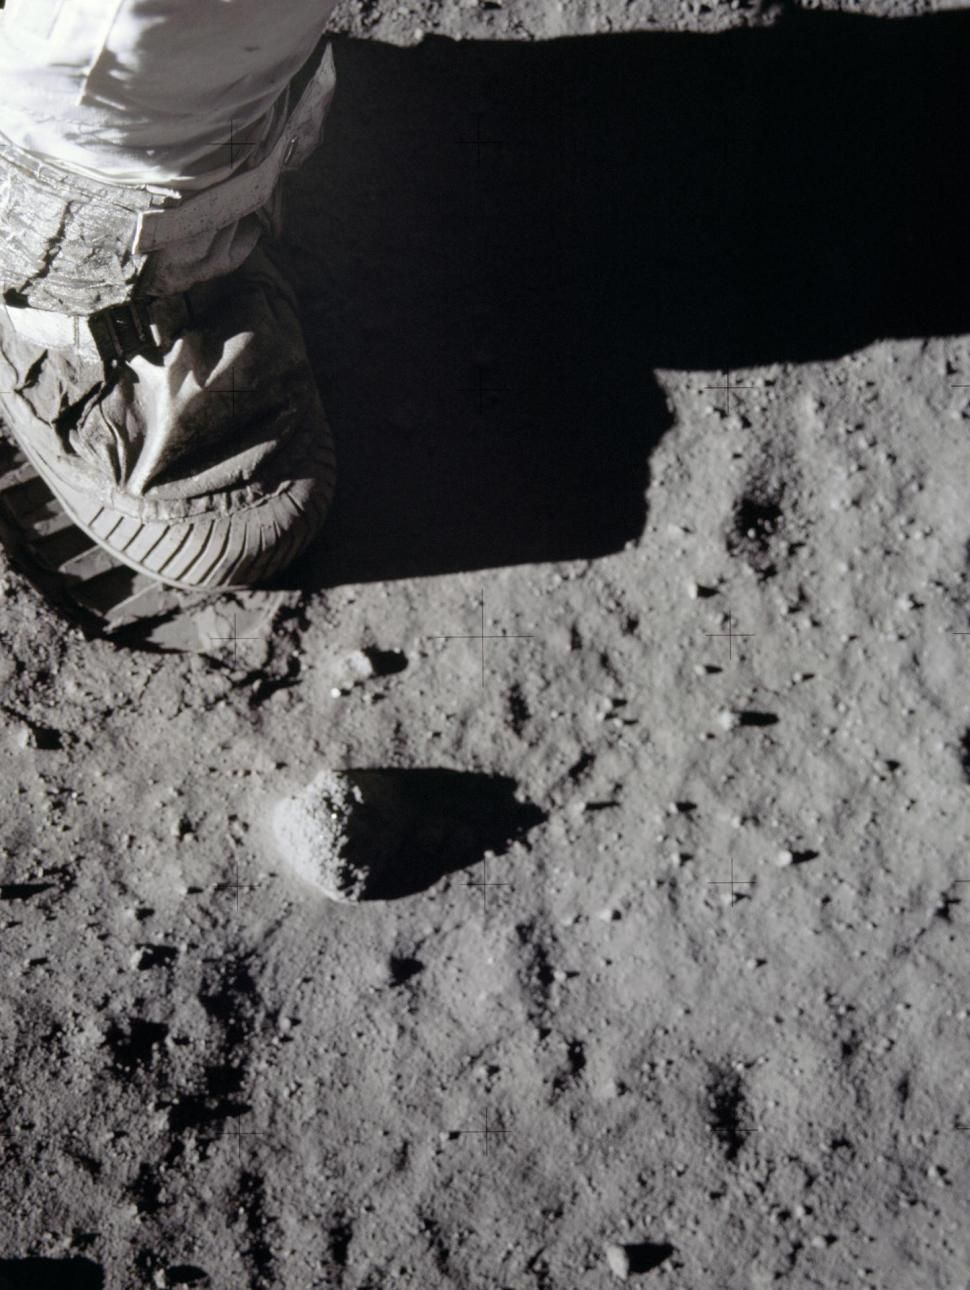 Meet the Museum: Why Humans should explore the Moon